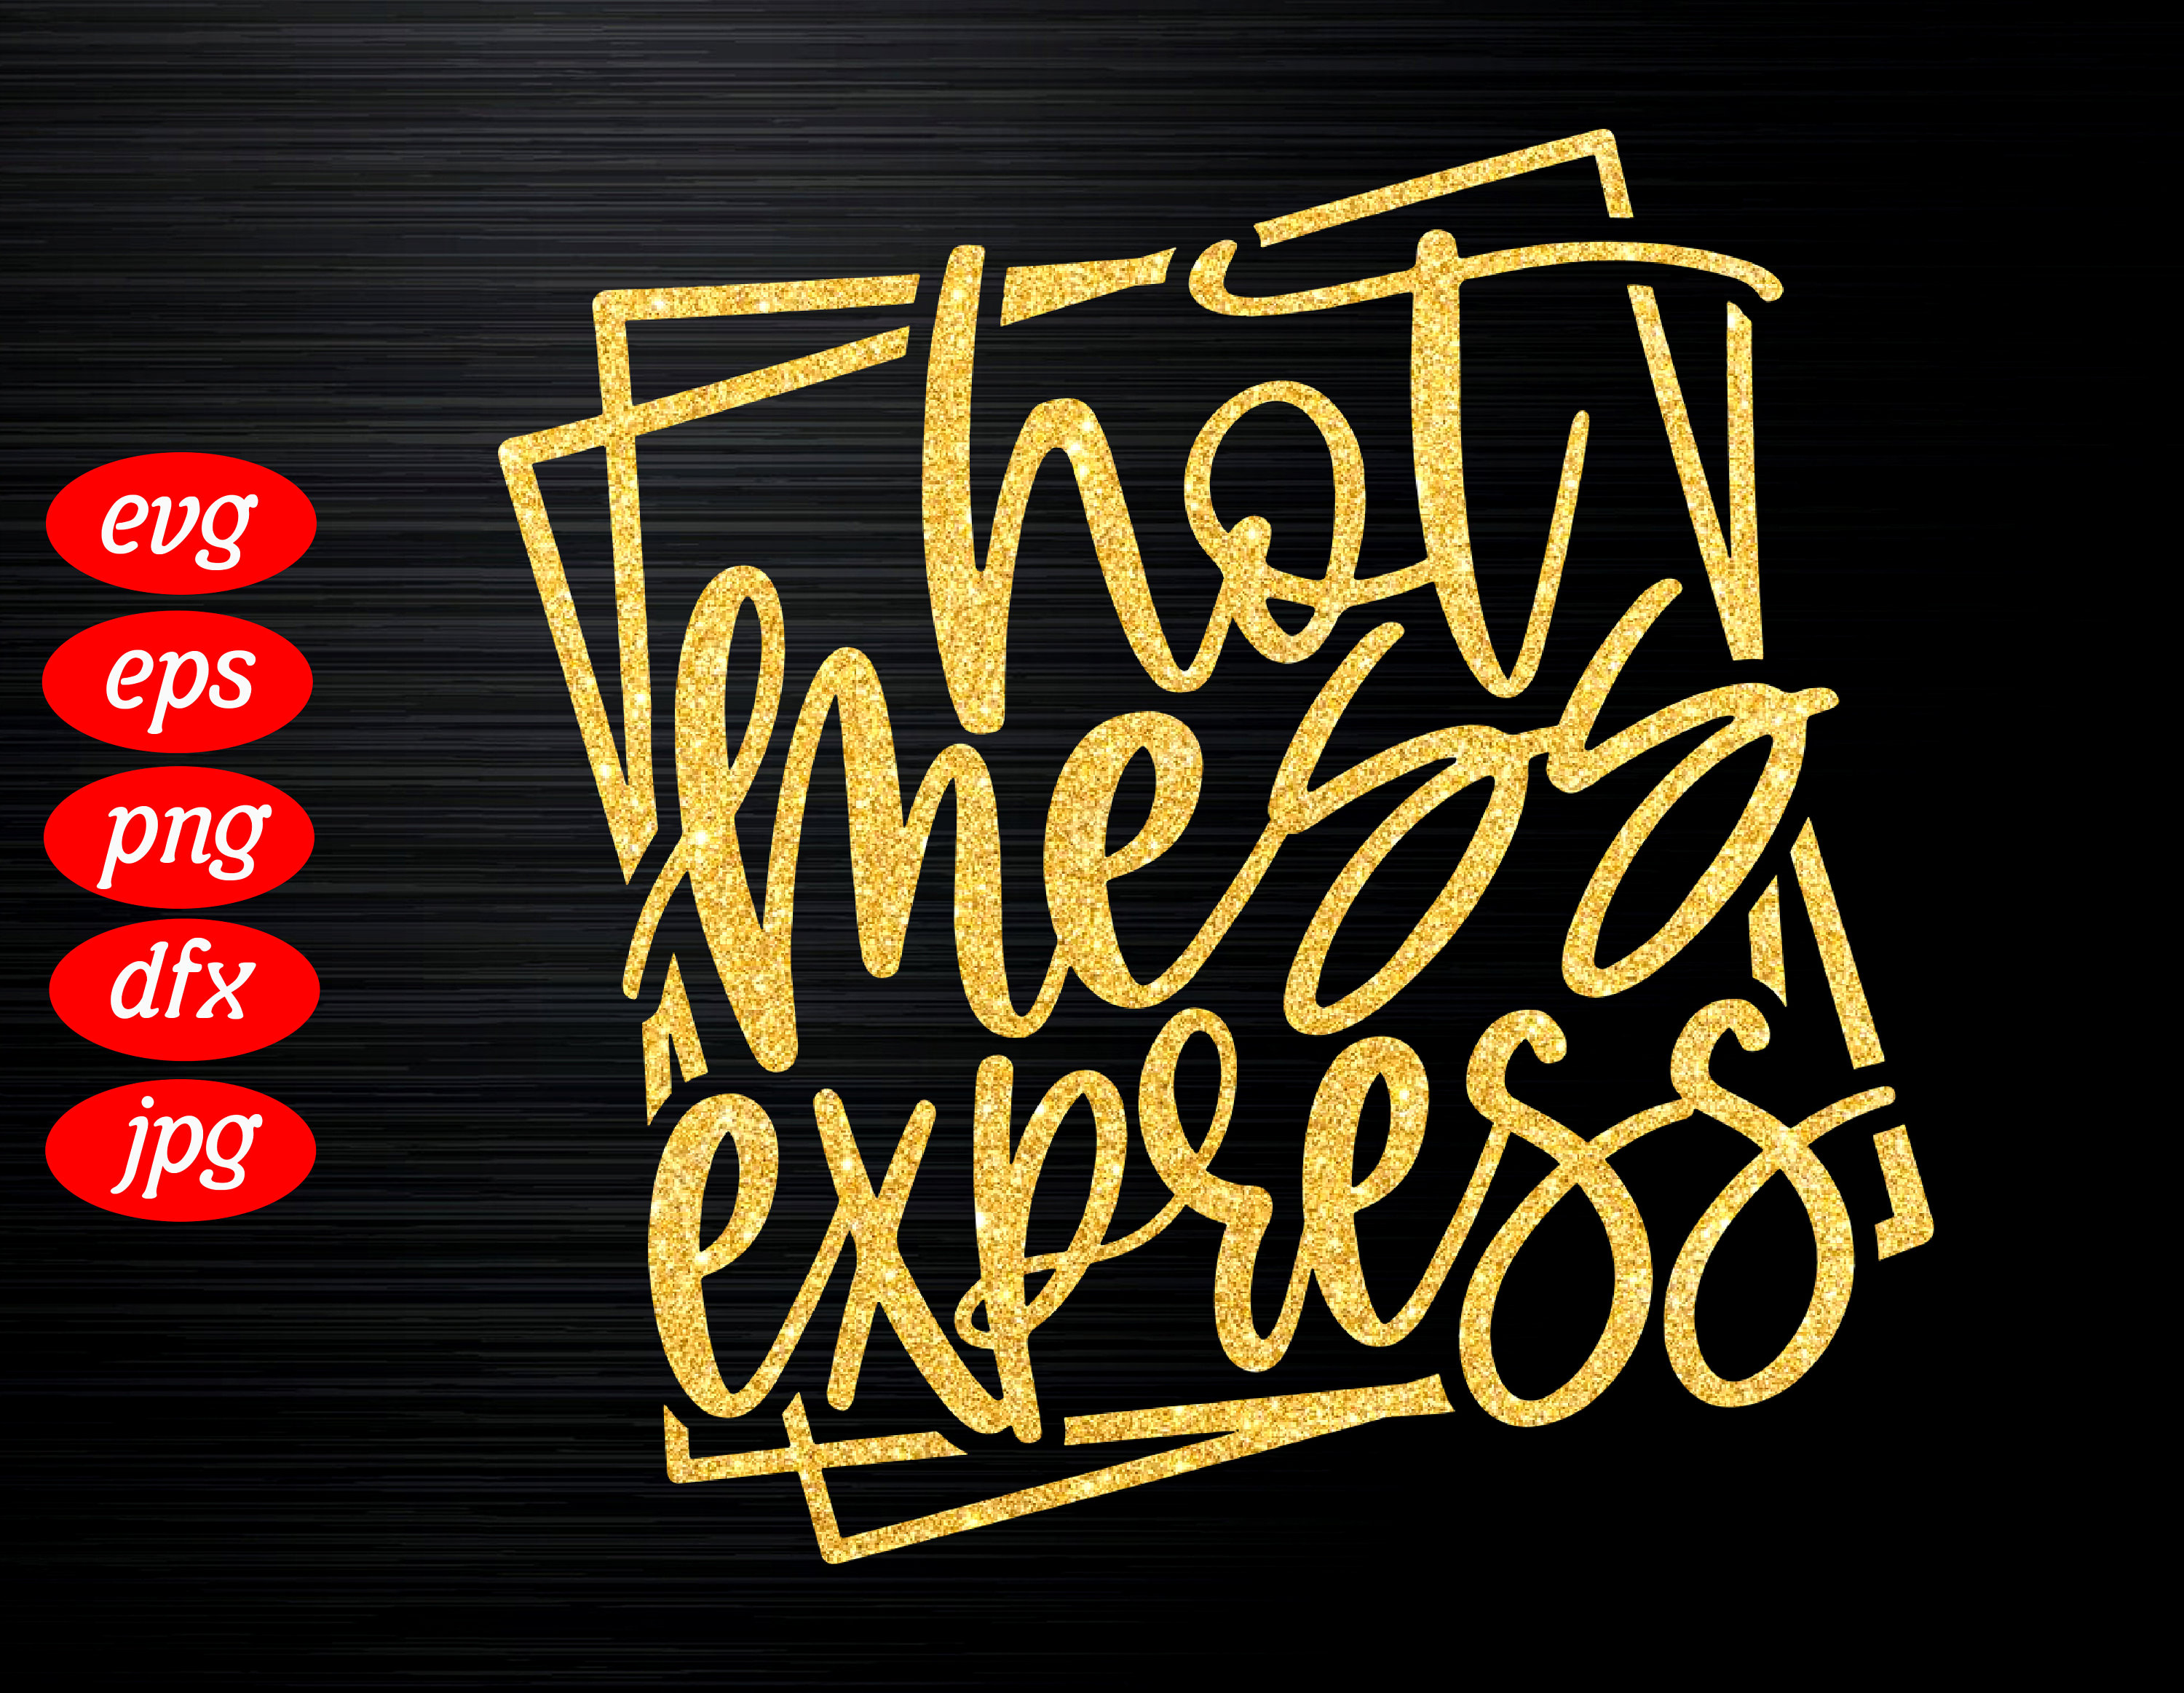 Hot Mess Express Art Related Keywords & Suggestions - Hot Me